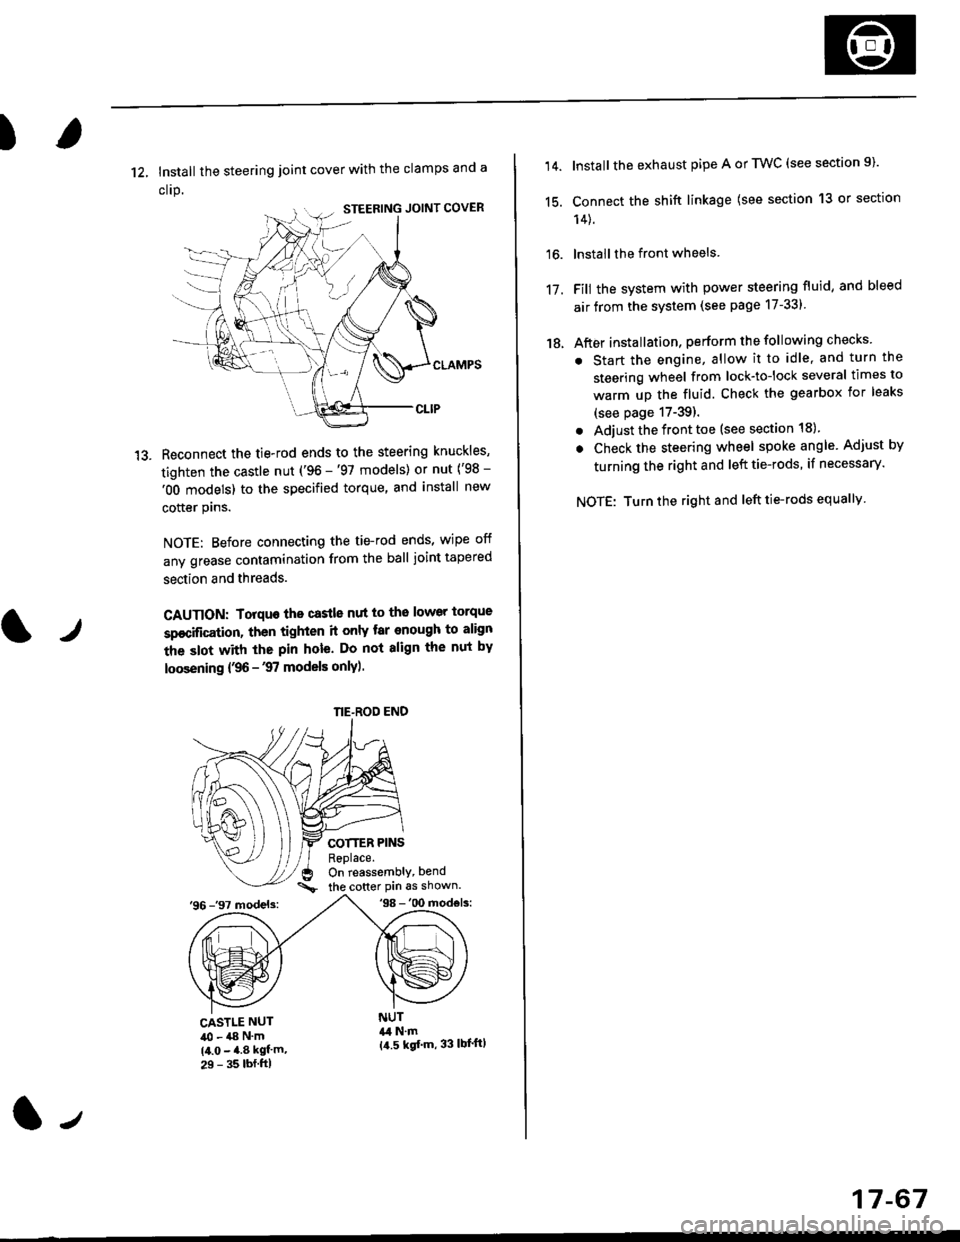 HONDA CIVIC 1996 6.G User Guide )
1?
12, Install the steering joint cover with the clamps and a
clrp.
Reconnect the tie-rod ends to the steering knuckles,
tighten the castle nut (96 -97 models) or nut (98 -
OO models) to the spe